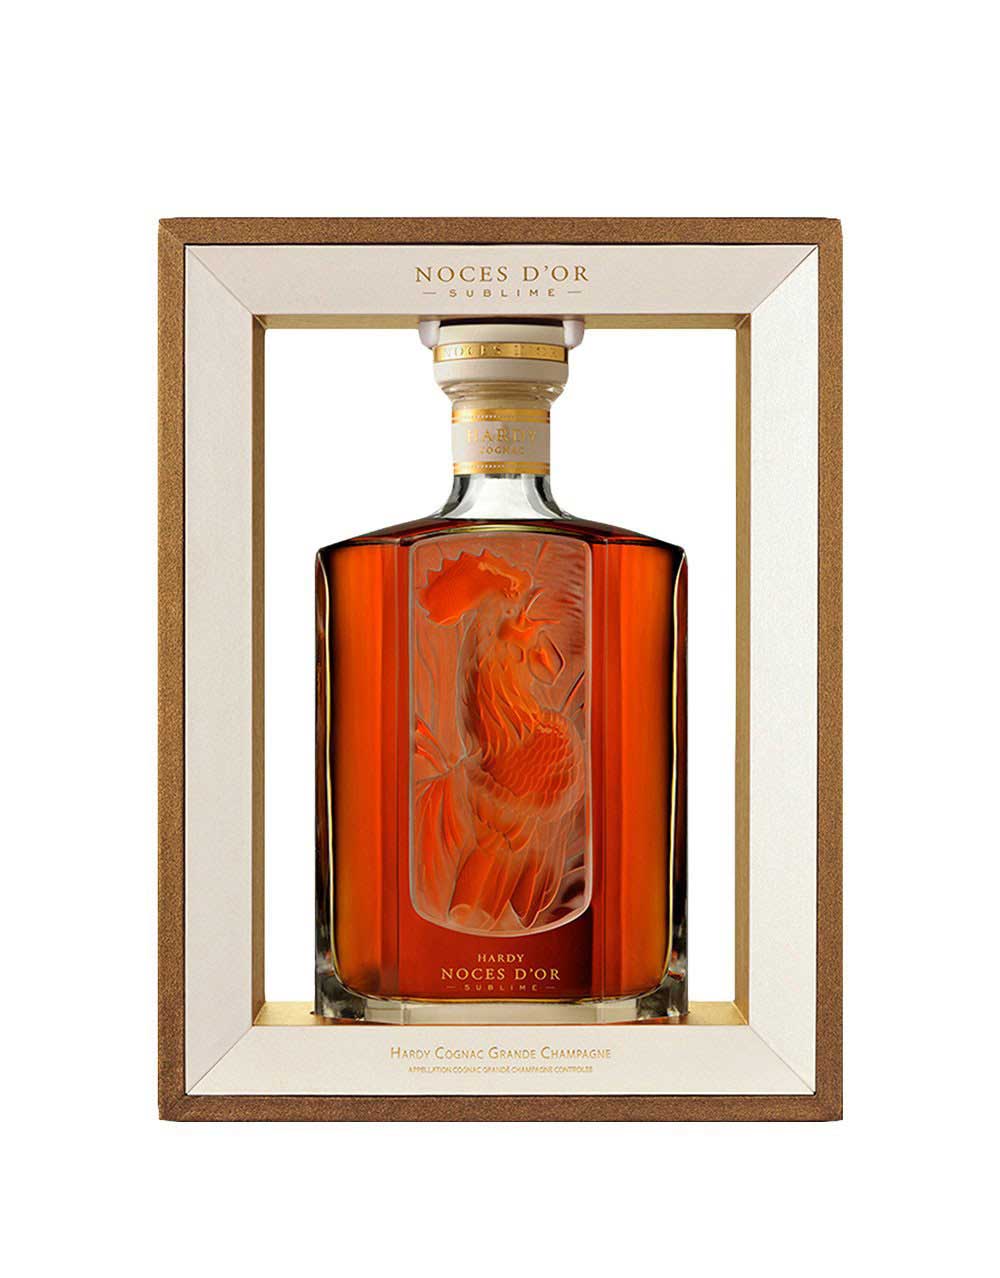 Hennessy V.S.O.P Privilge Limited Edition By Guanyu Zhang Cognac